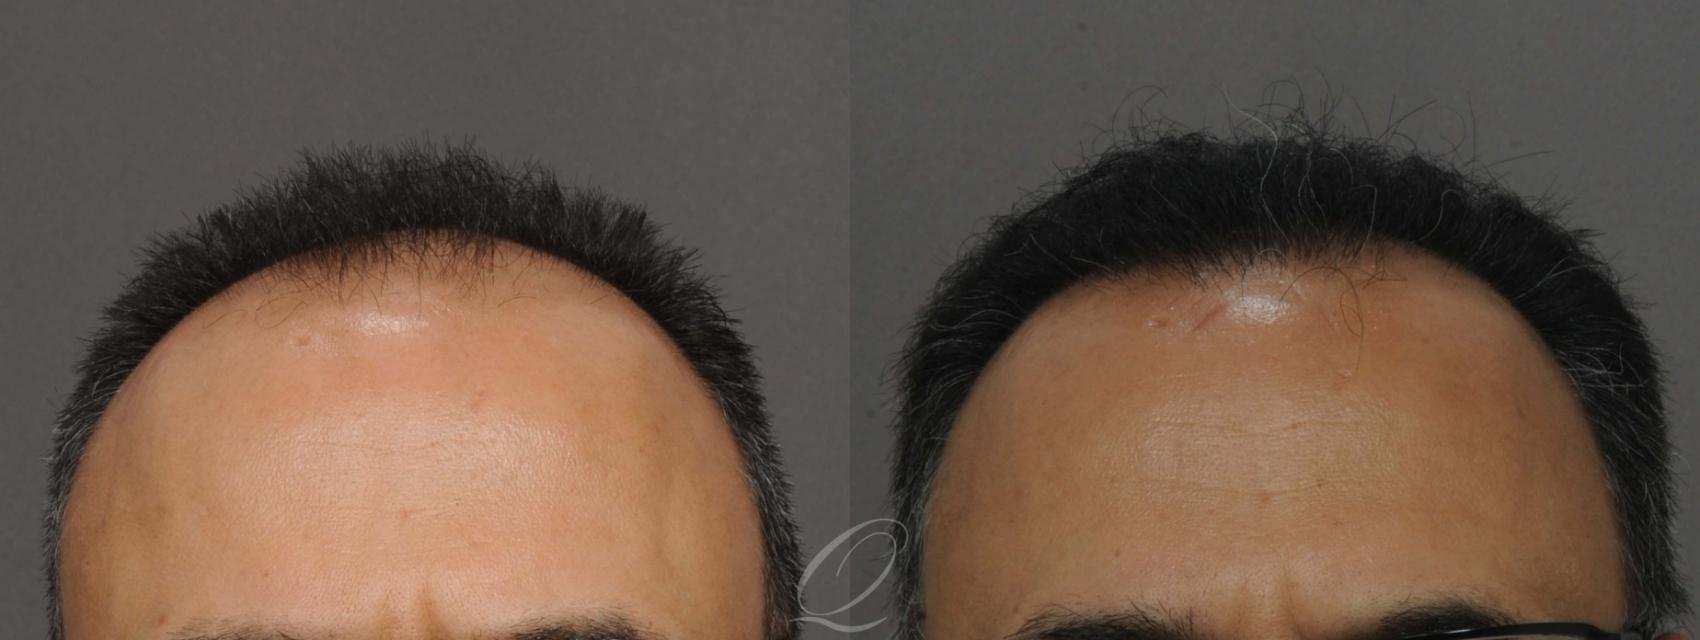 FUT Before & After Photos Patient 1013 | Rochester, Buffalo, & Syracuse, NY  | Quatela Center for Hair Restoration